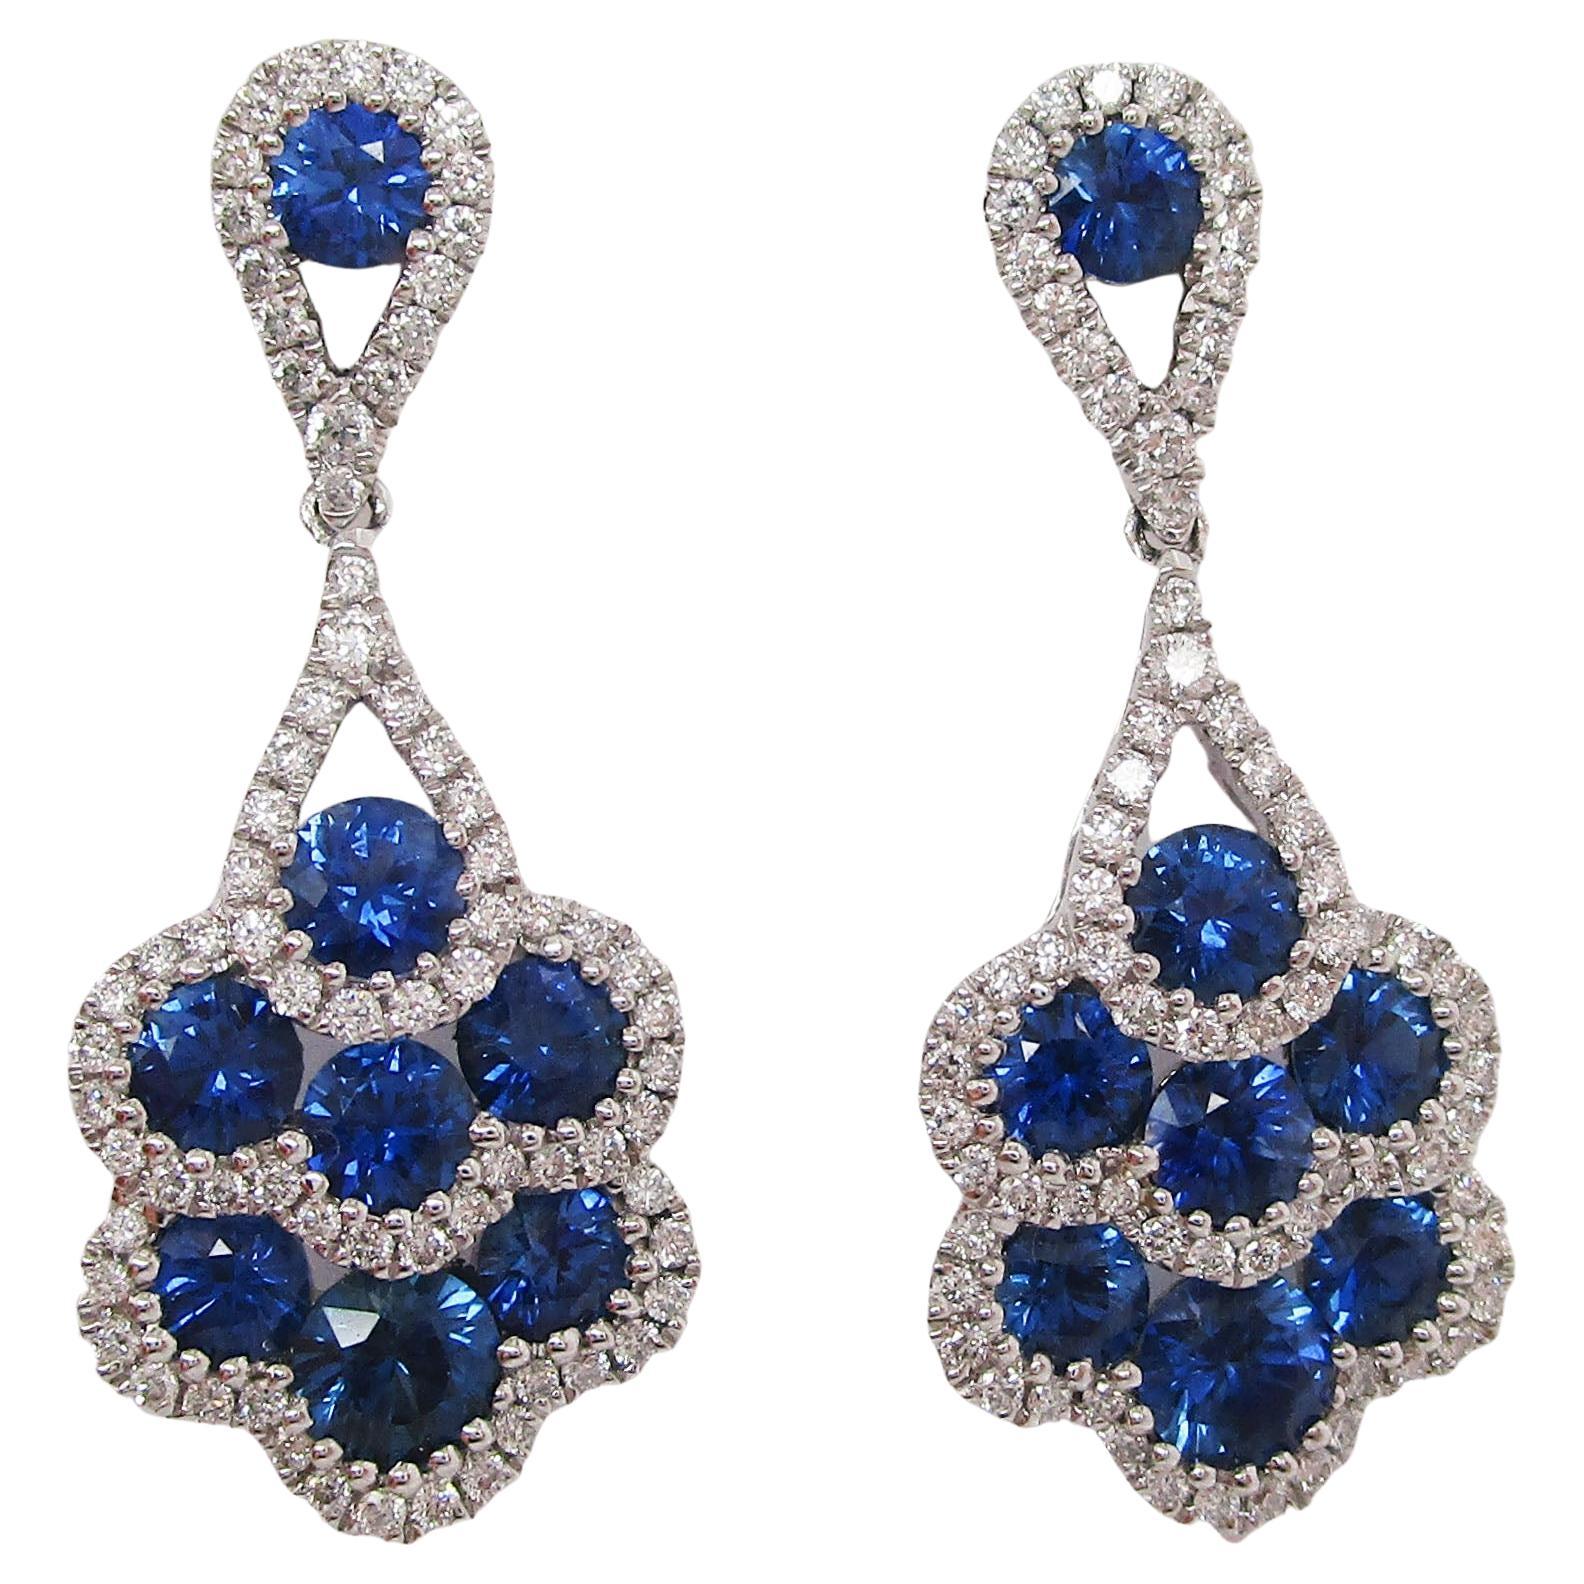 Contemporary 18k White Gold Blue Sapphire and Diamond Dangle Earrings